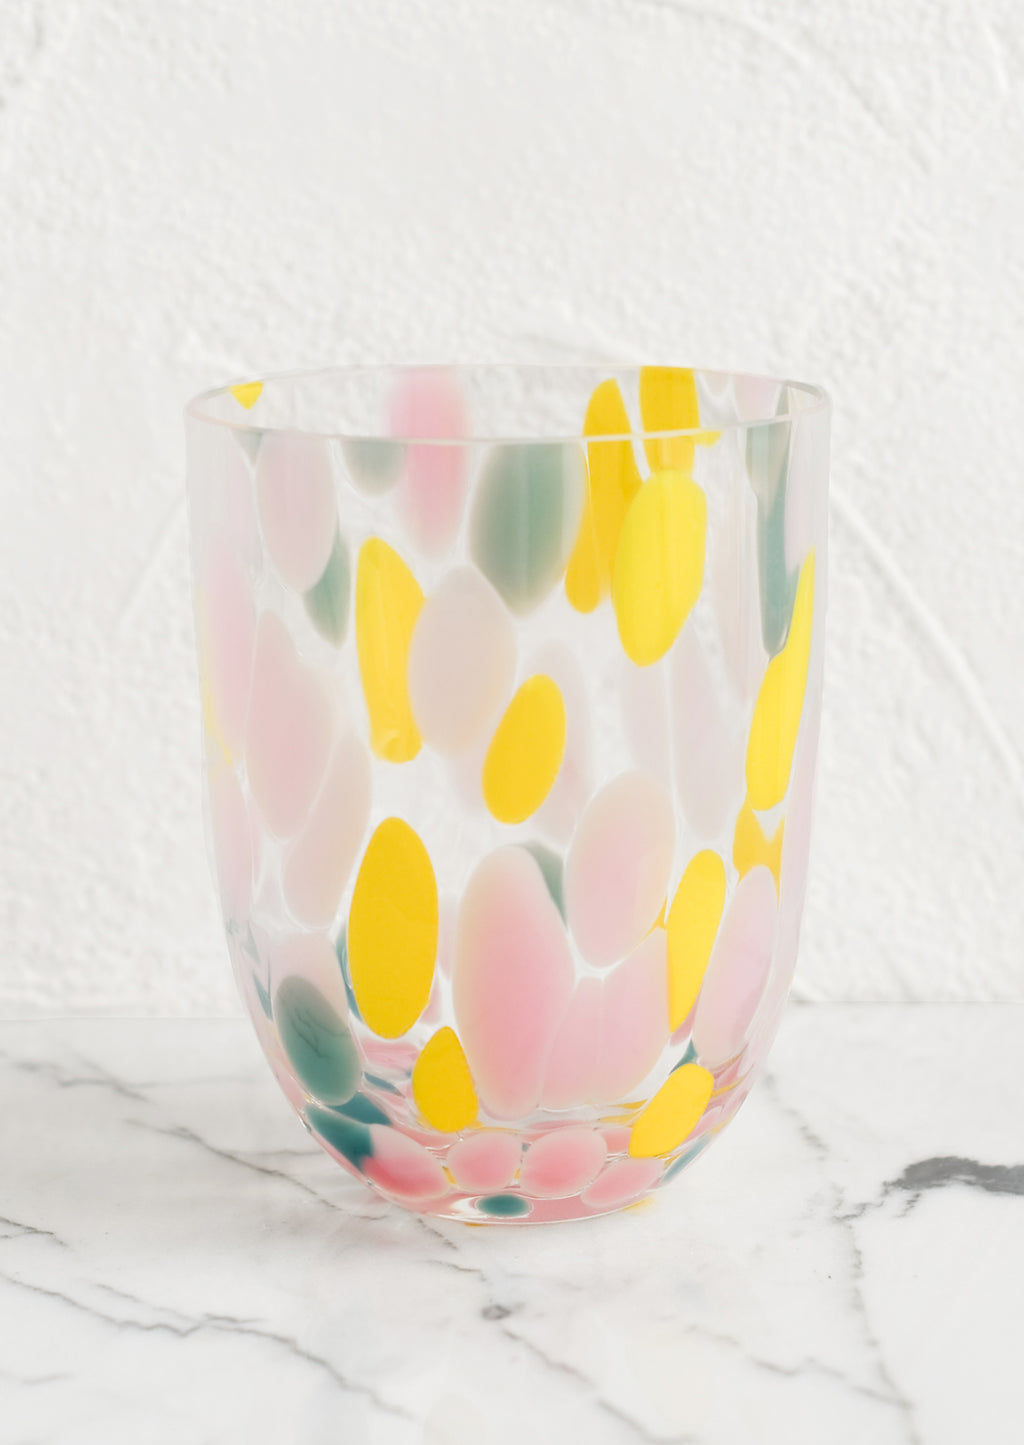 Multi / Sparse: A handmade speckled glass juice cup with teal, yellow and pink spots.